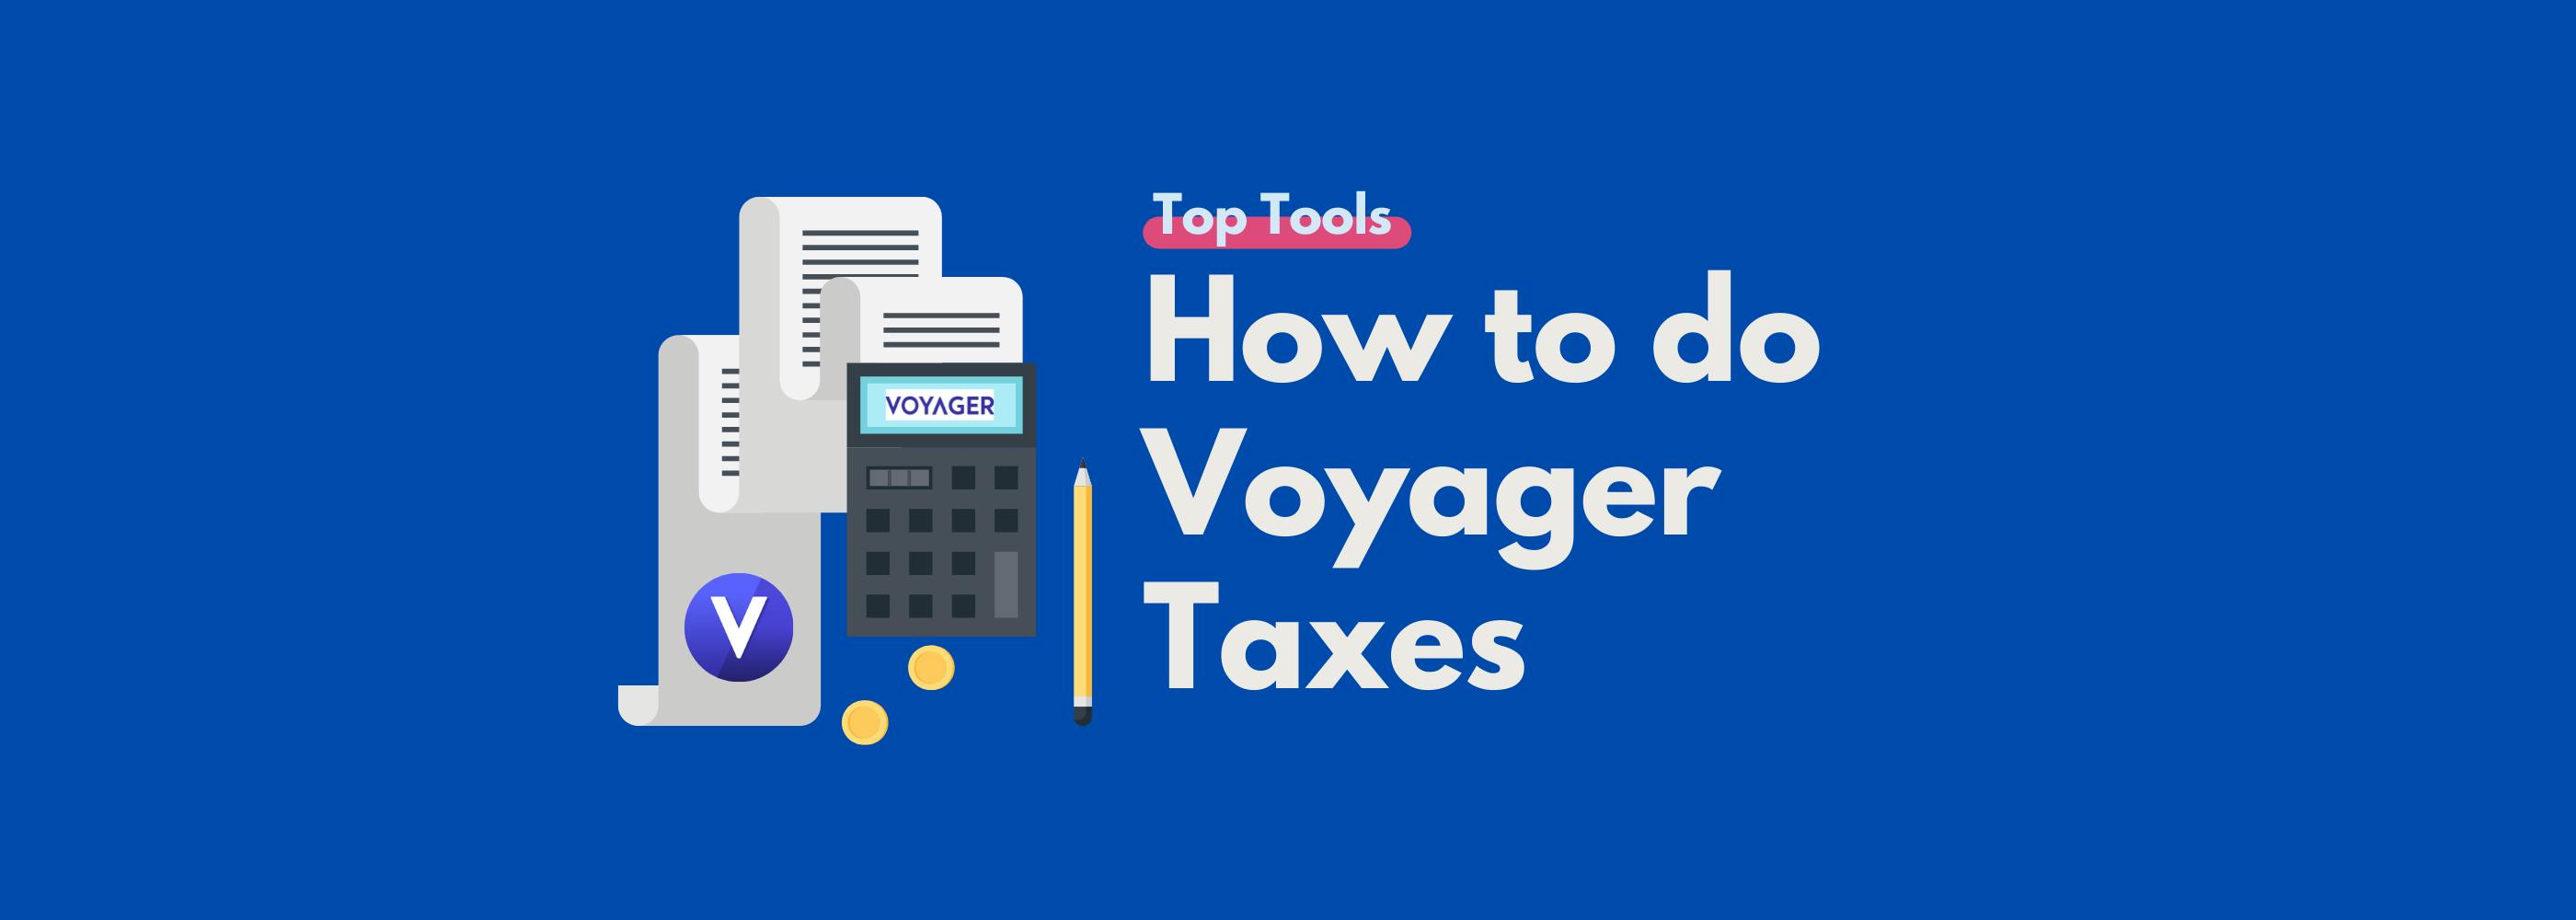 How to do Voyager Taxes